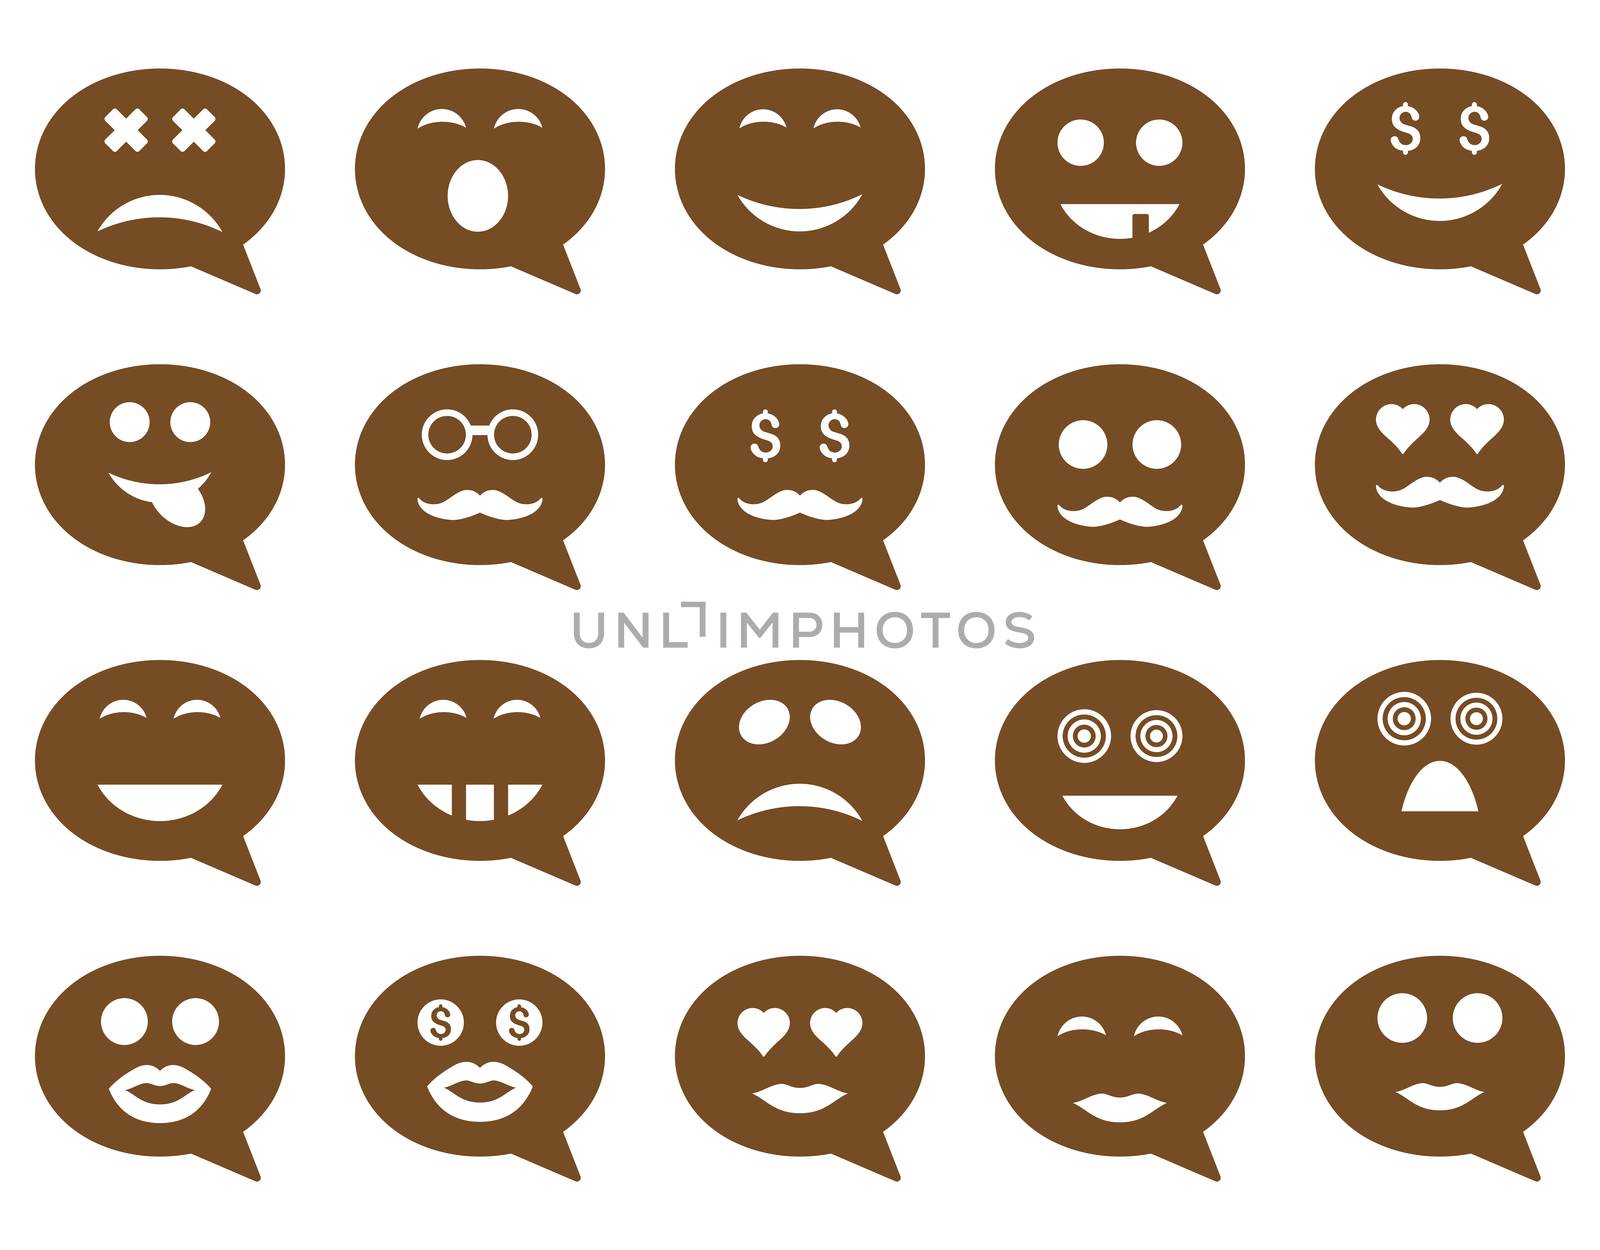 Chat emotion smile icons. Glyph set style is flat images, brown symbols, isolated on a white background.